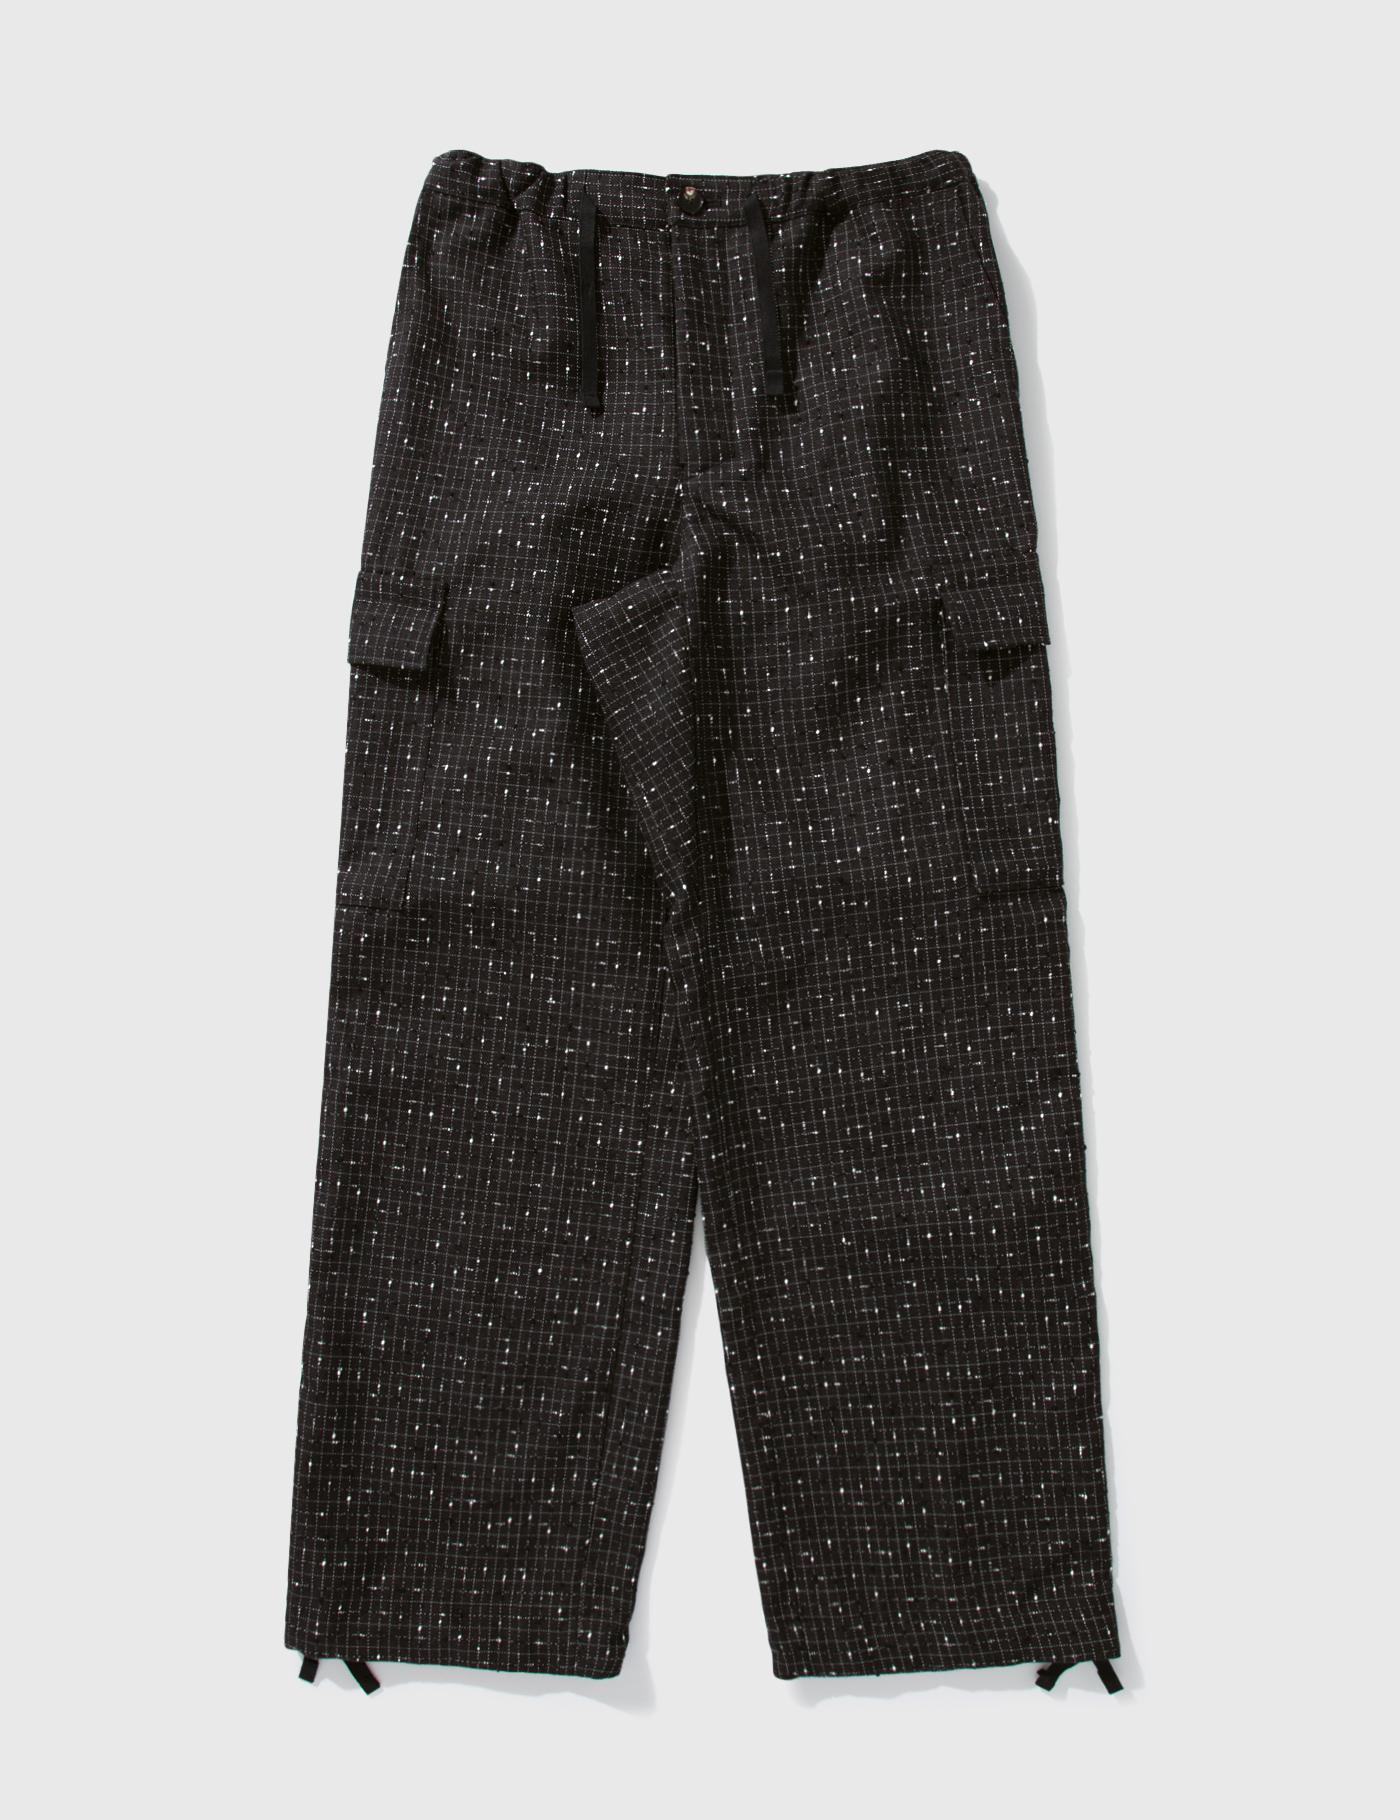 Reflector Tweed Field Trousers by NULABEL | jellibeans